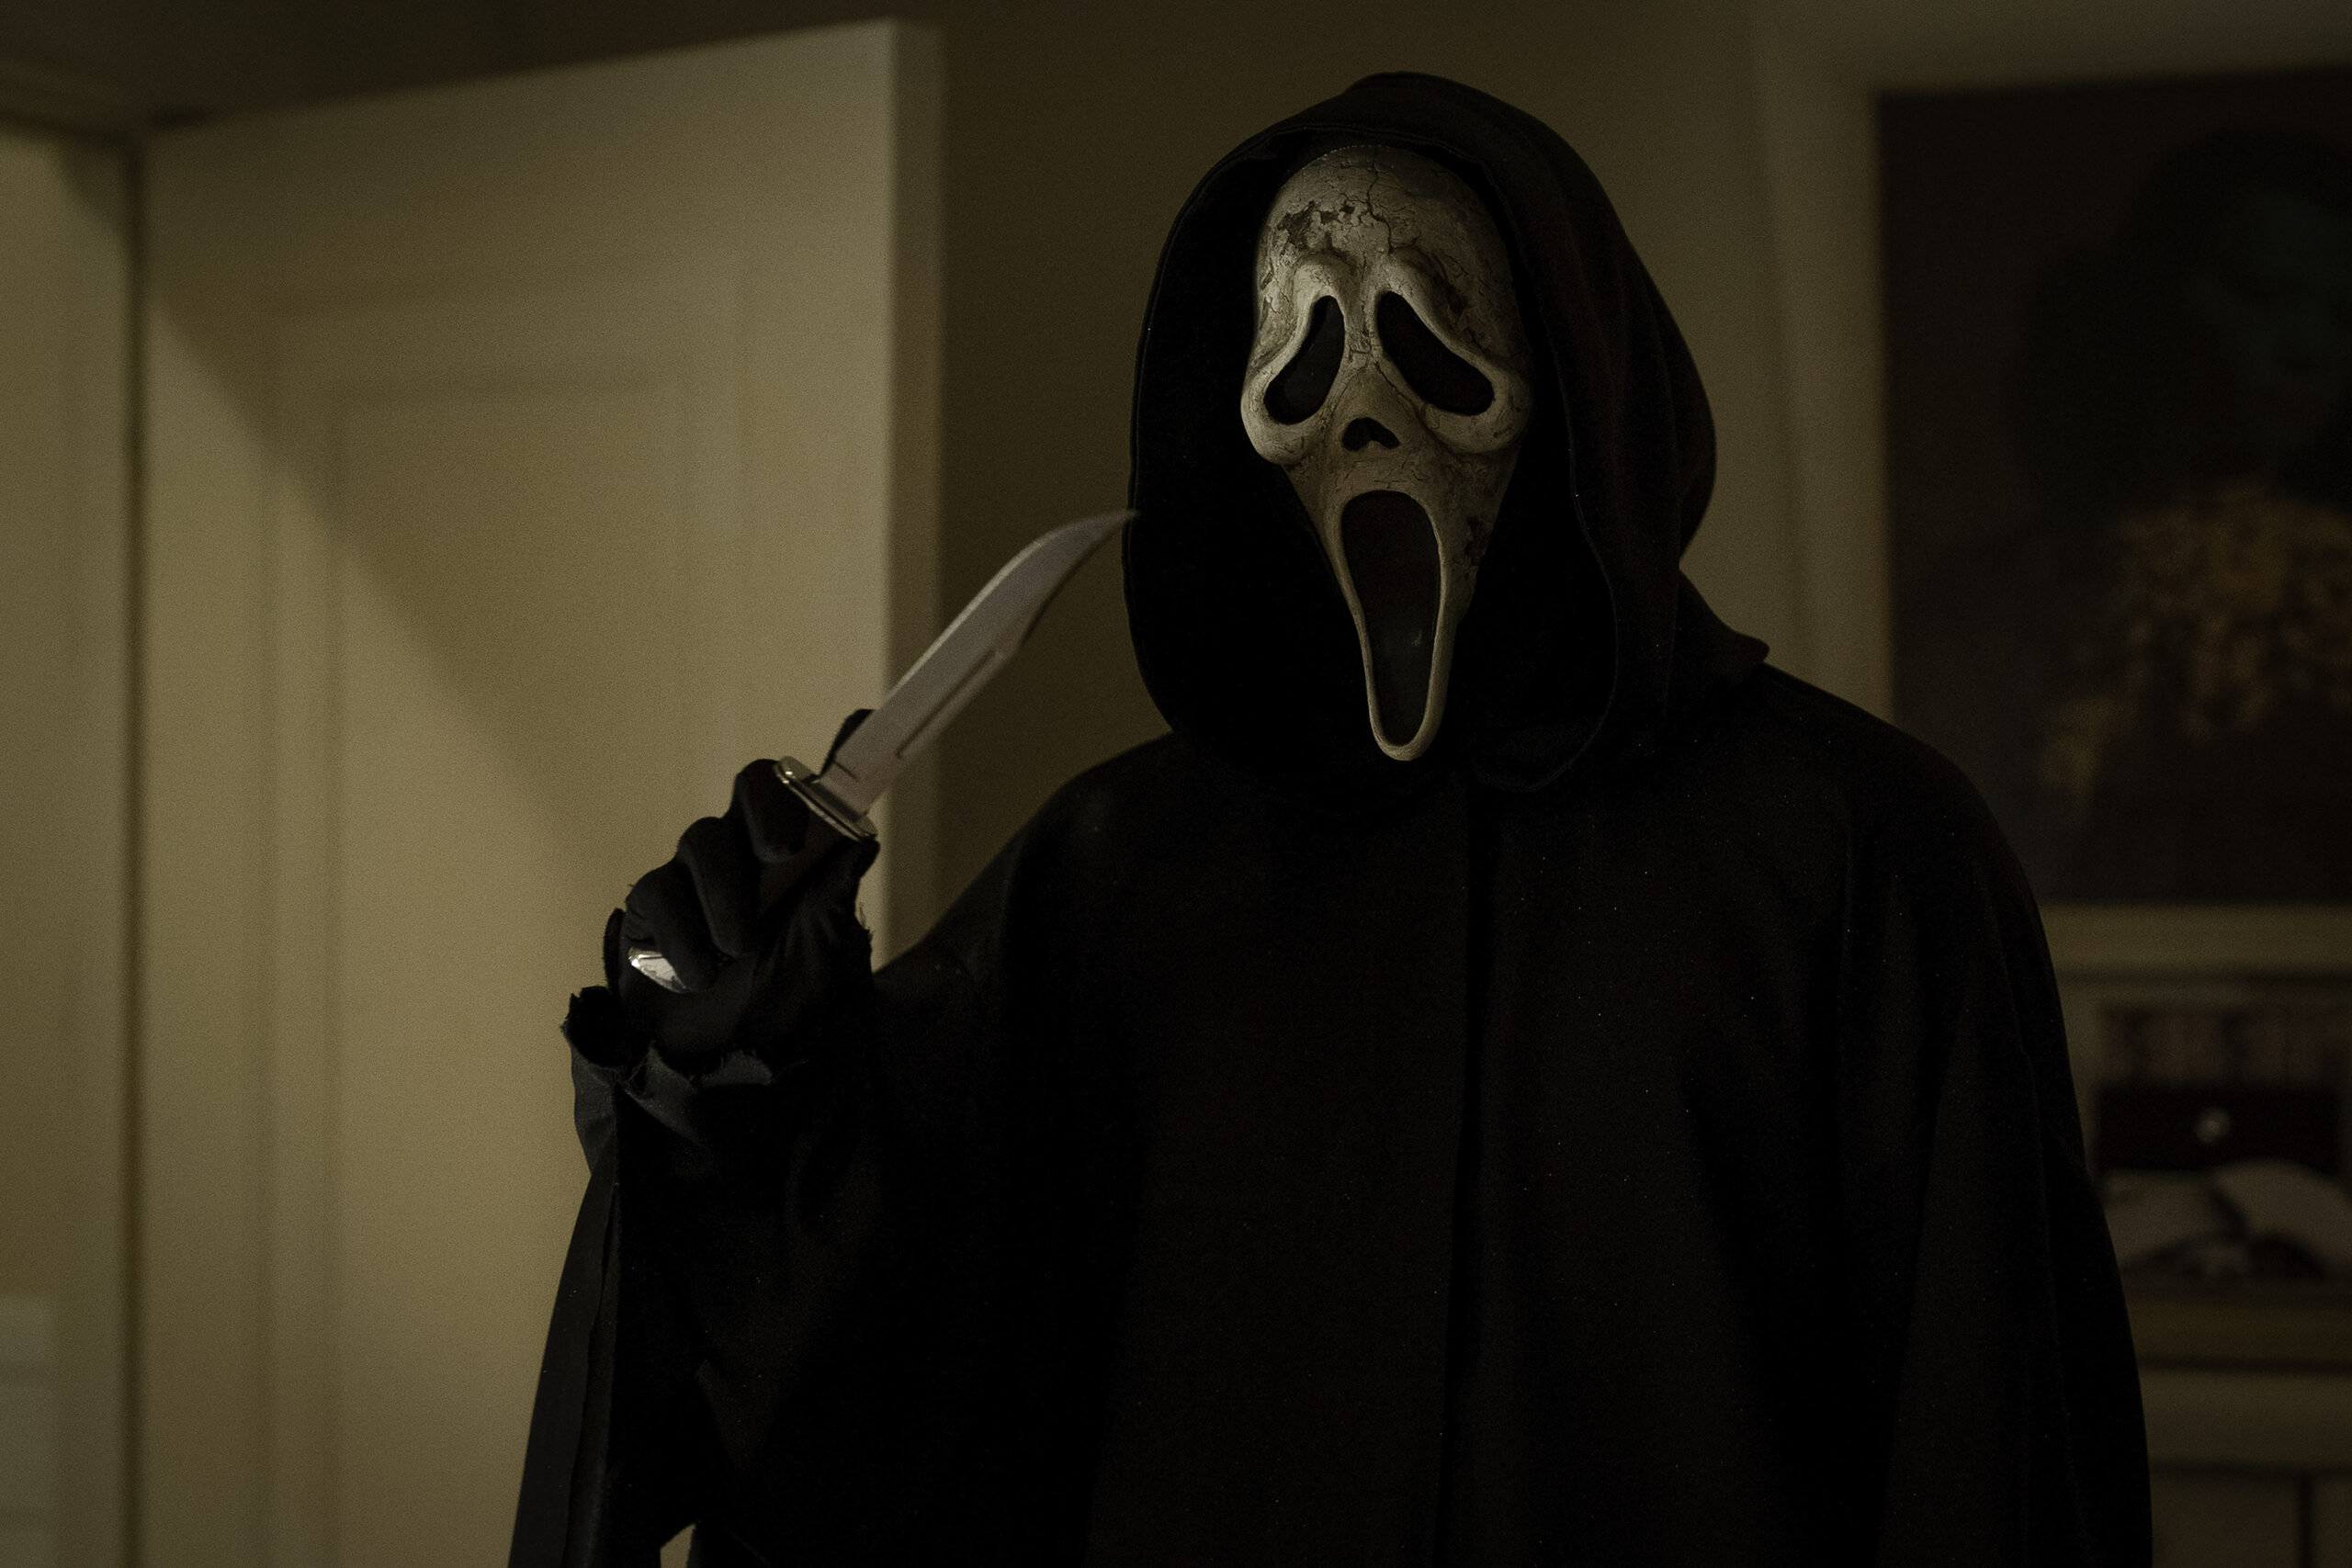 Ghostface in Paramount Pictures and Spyglass Media Group's "Scream VI." © 2022 Paramount Pictures. Ghost Face is a Registered Trademark of Fun World Div., Easter Unlimited, Inc. ©1999. All Rights Reserved.”. Ghost Face is a Registered Trademark of Fun World Div., Easter Unlimited, Inc. ©1999. All Rights Reserved.”